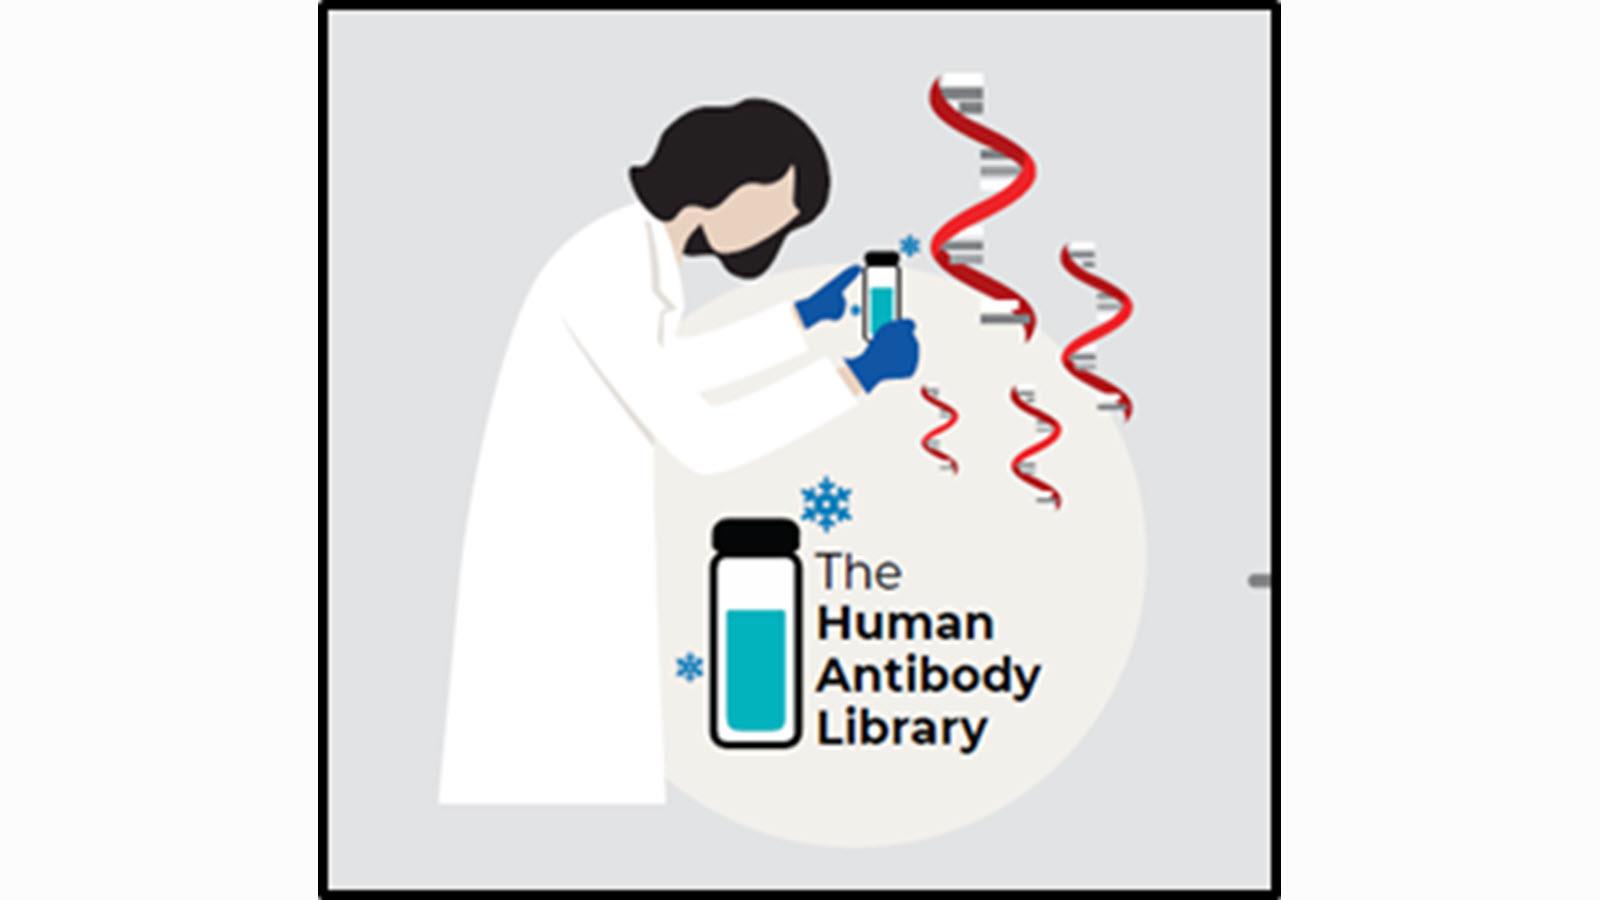 The Human Antibody Library logo - scientist in a lab coat